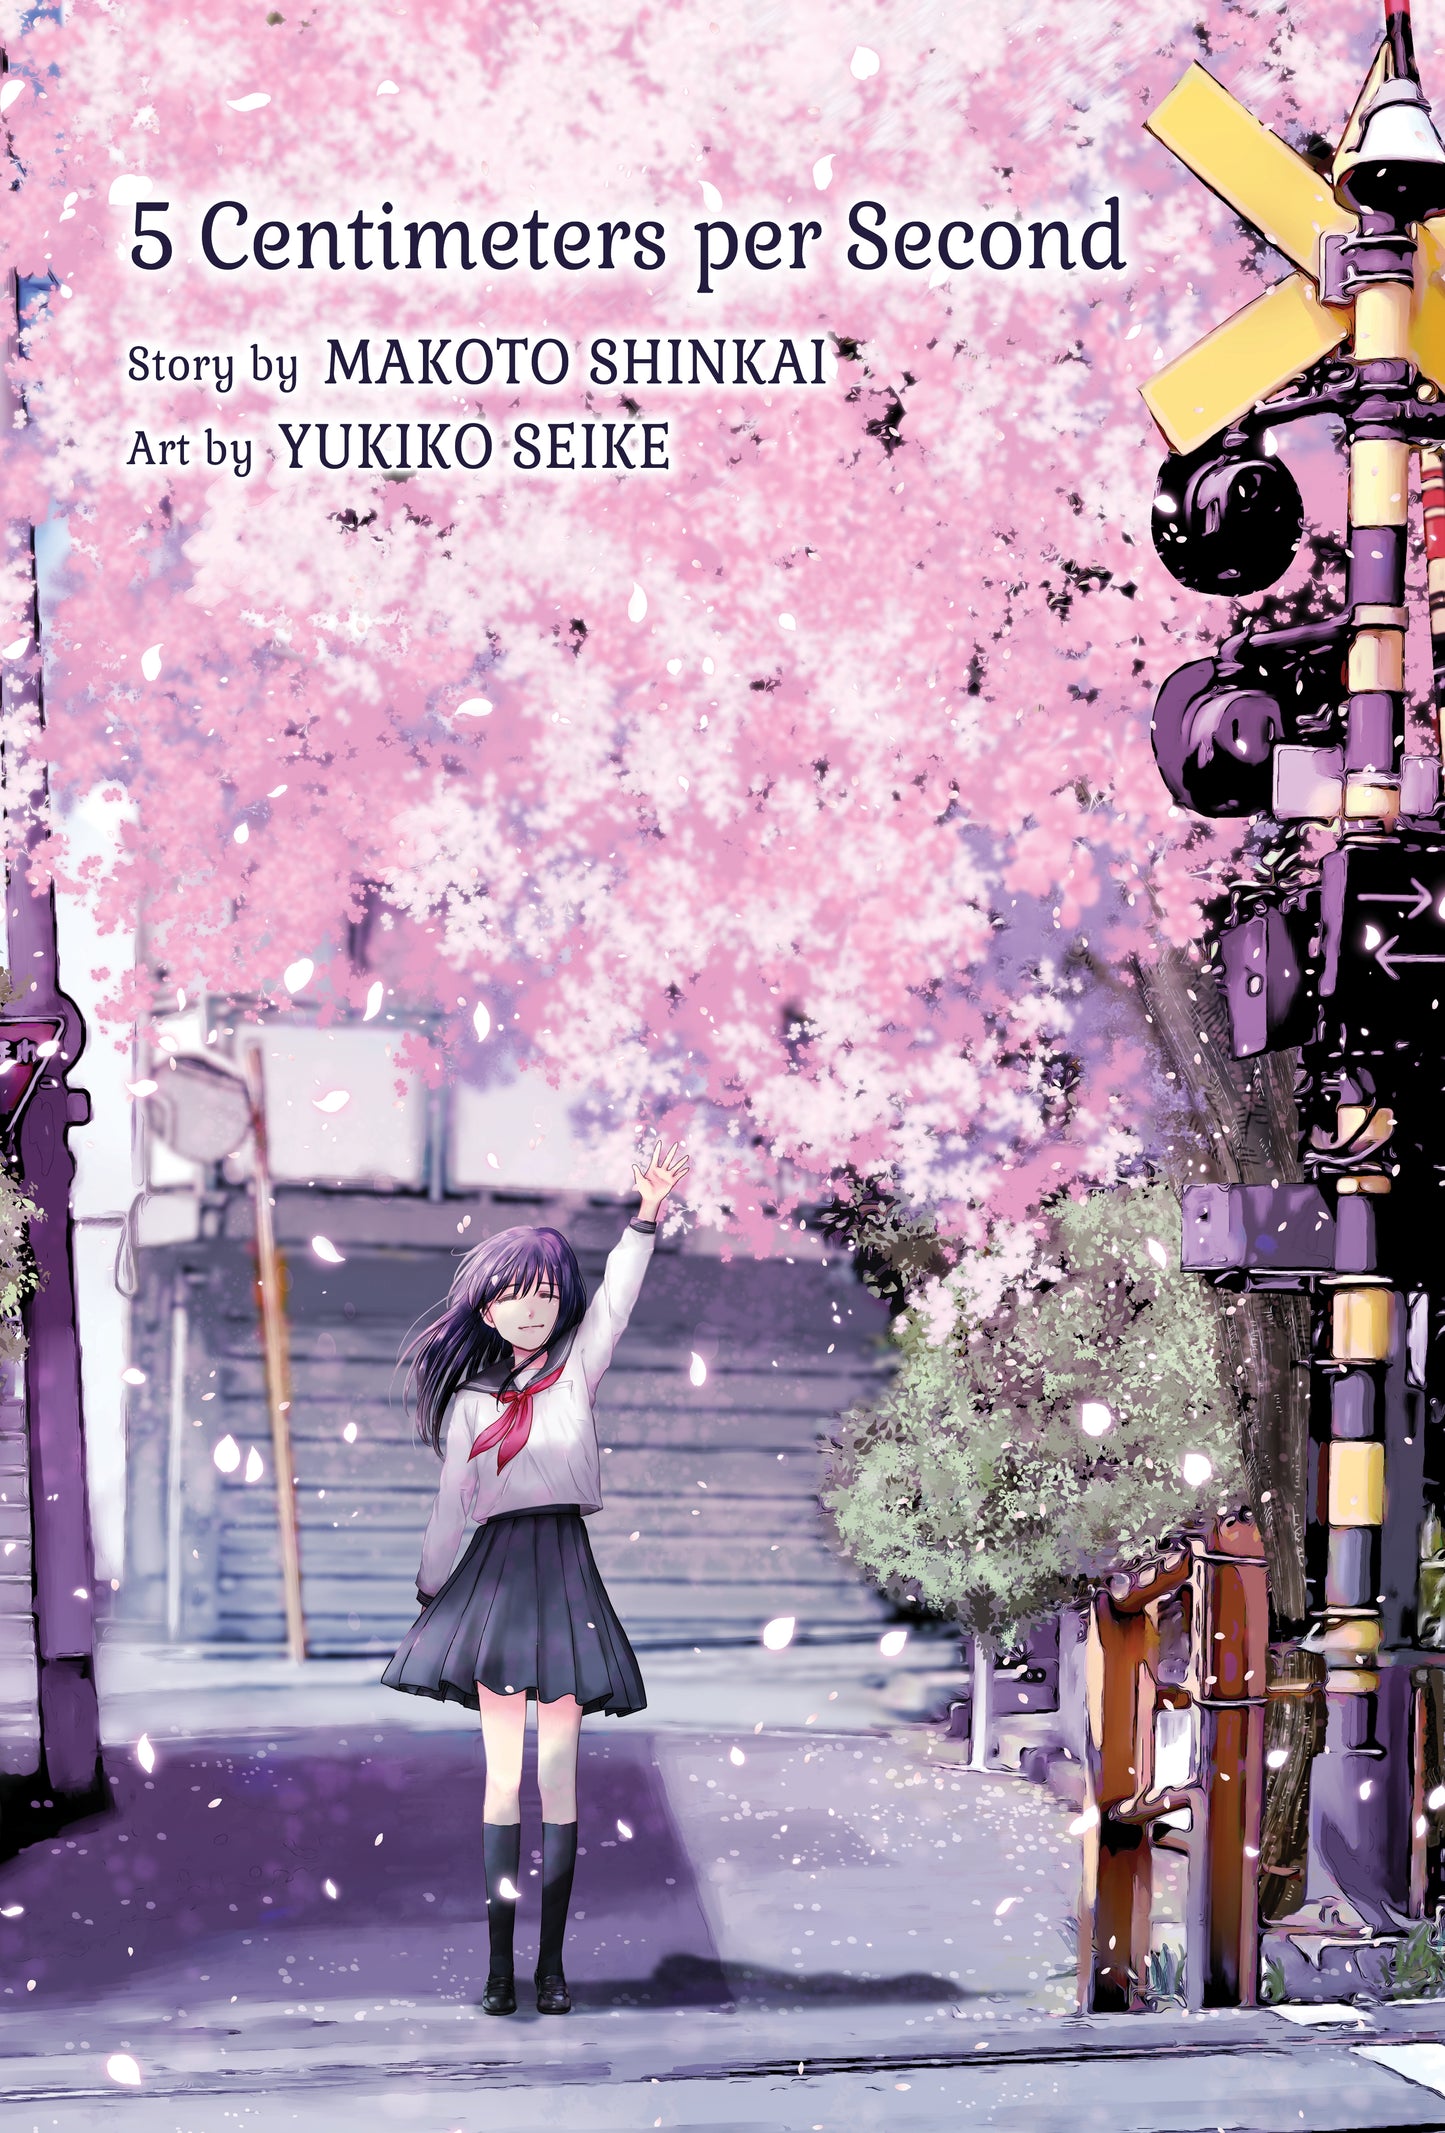 5 Centimeters per Second (Collector's Edition) - Manga Warehouse